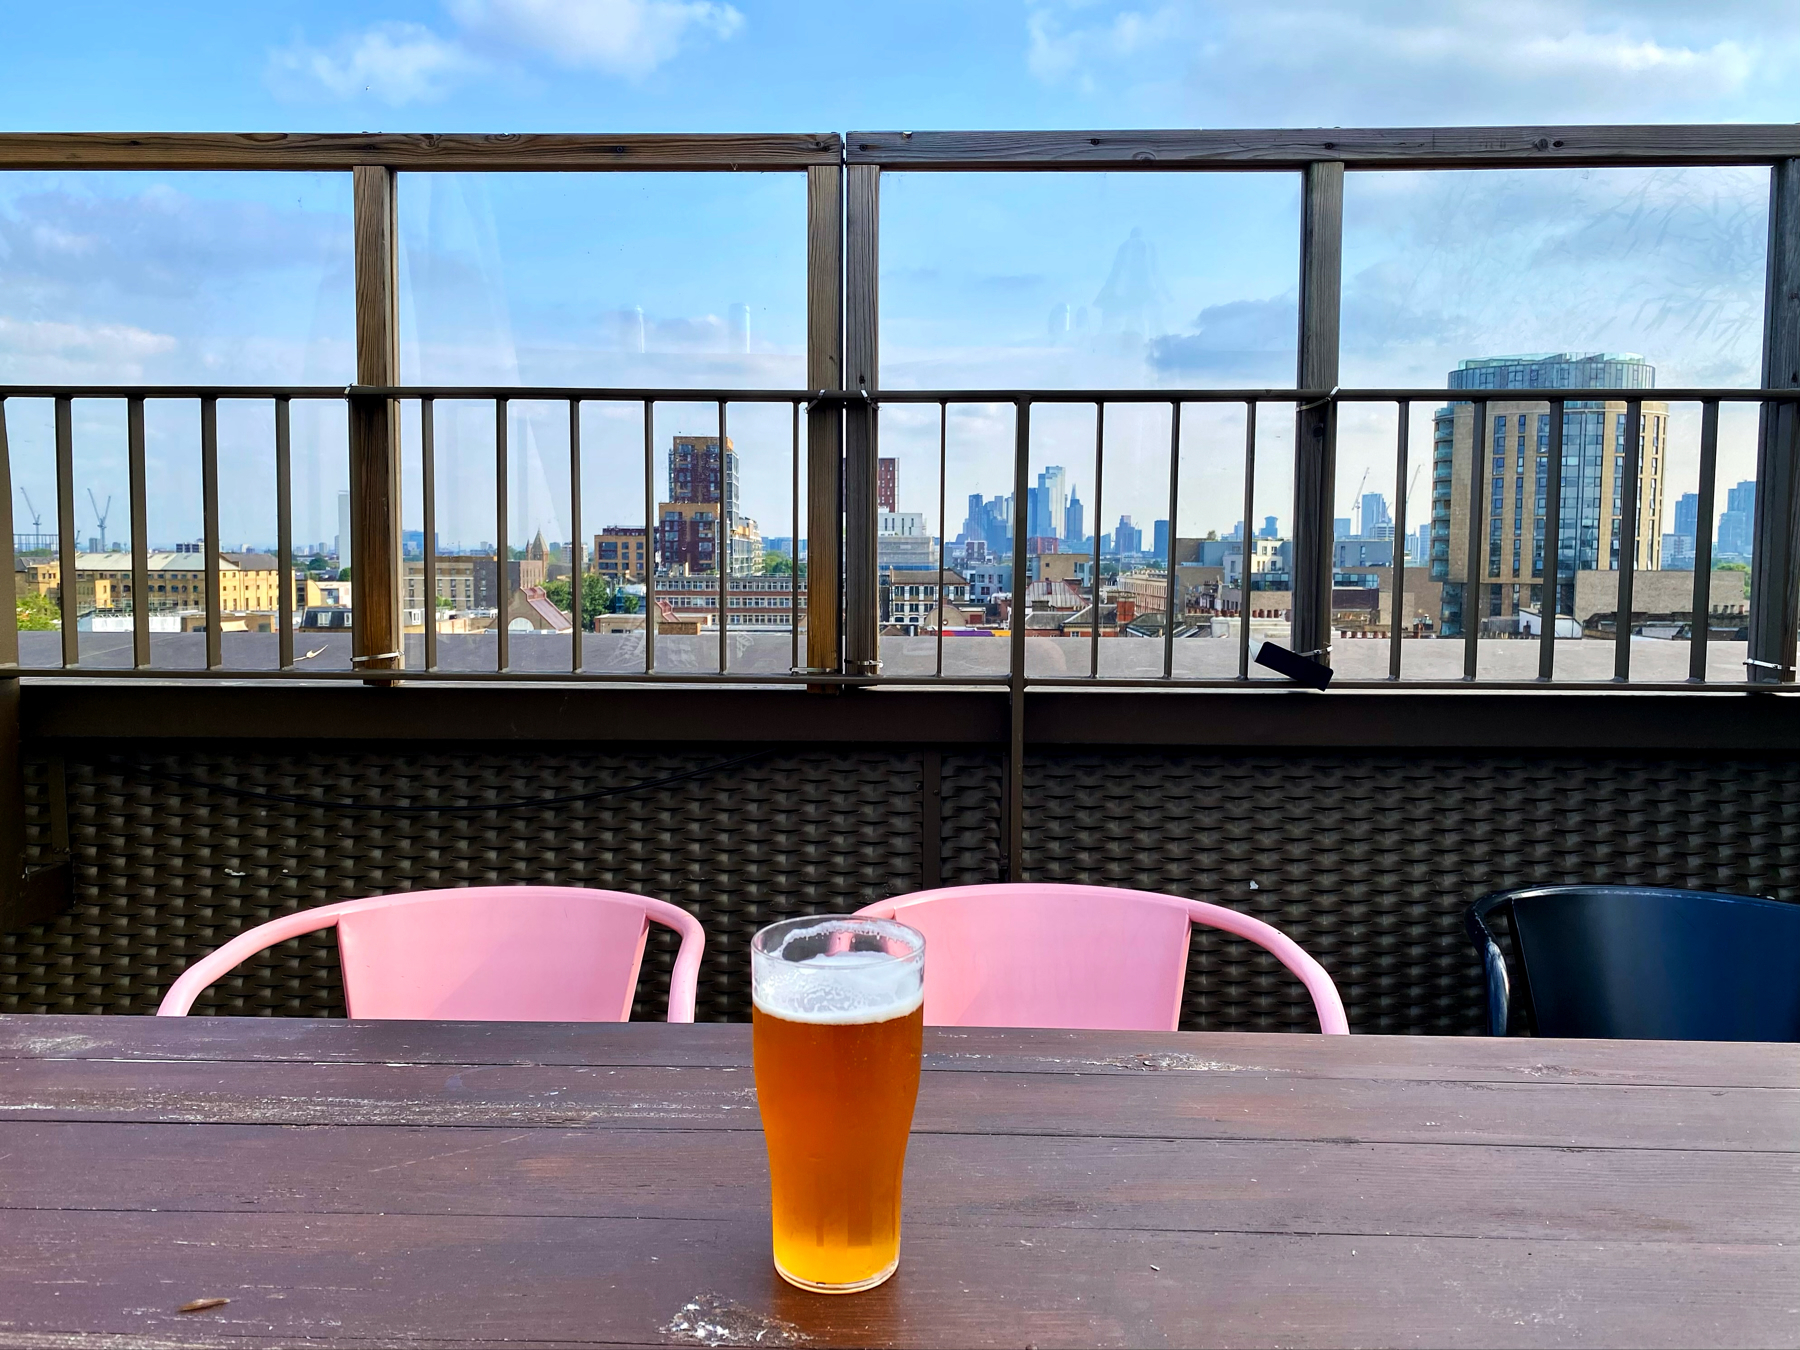 A rooftop scene with a wooden table, pink and black chairs, and a glass of beer in the center. The background features a metal railing and a cityscape under a blue, partly cloudy sky.